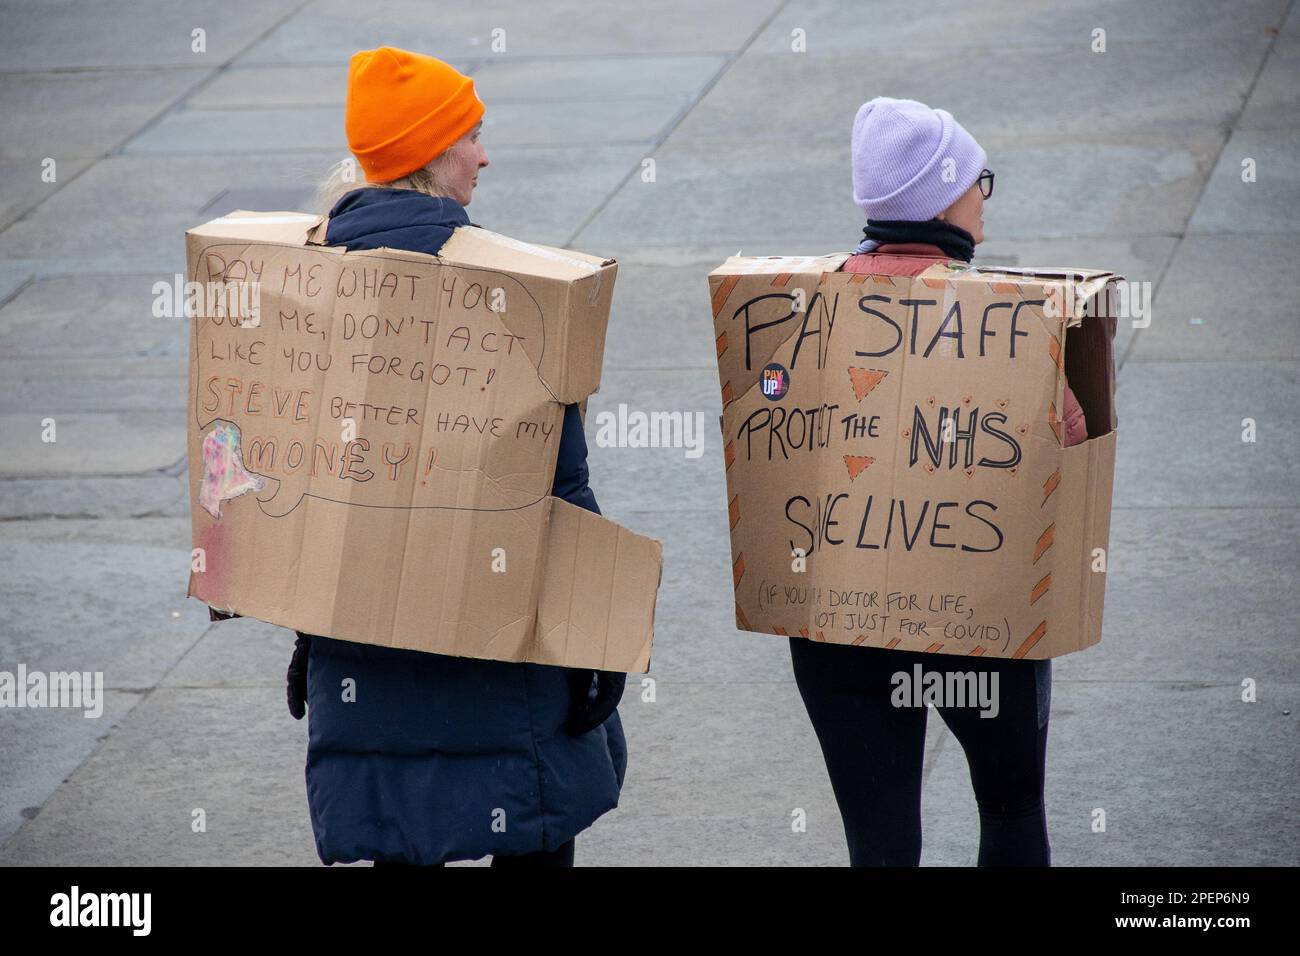 London, UK. 15th Mar, 2023. Protesters from various groups, including teachers, civil workers, doctors, NHS, UCU staff, London Underground staff, and others, gathered at Trafalgar Sq to demonstrate as part of a national strike for increased pay on Budget Day. Credit: Sinai Noor/Alamy Live News Stock Photo